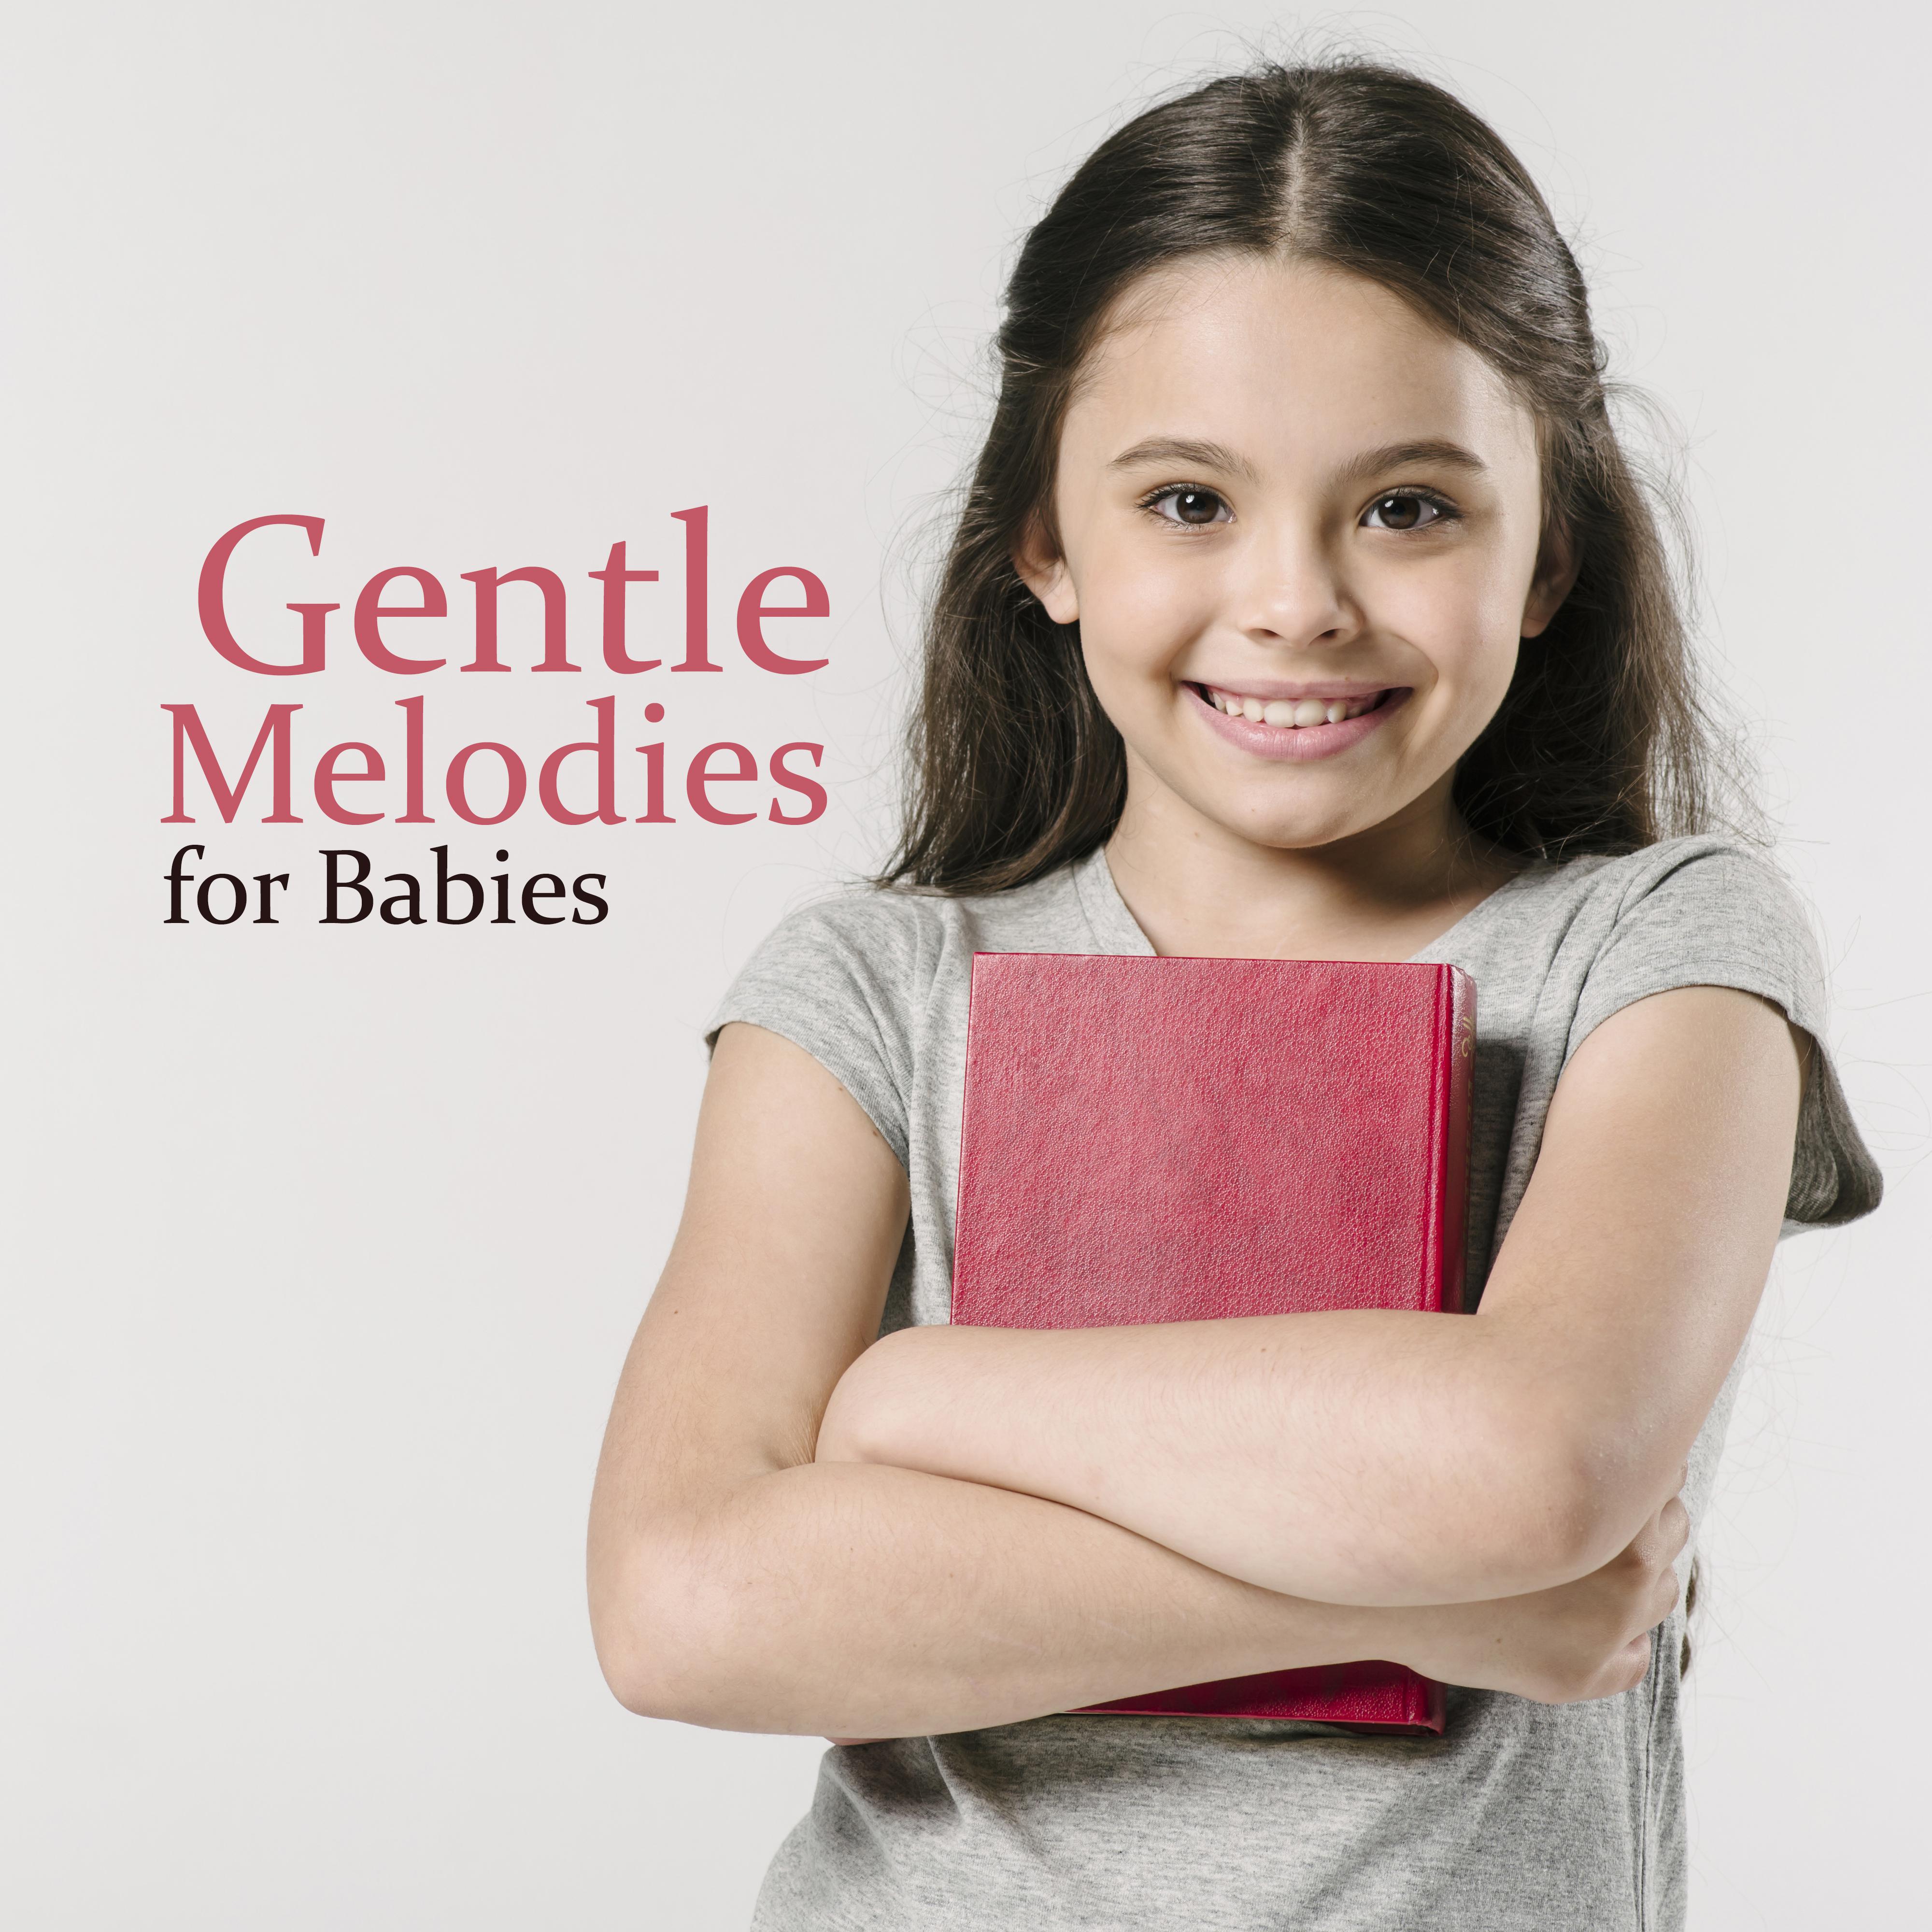 Gentle Melodies for Babies